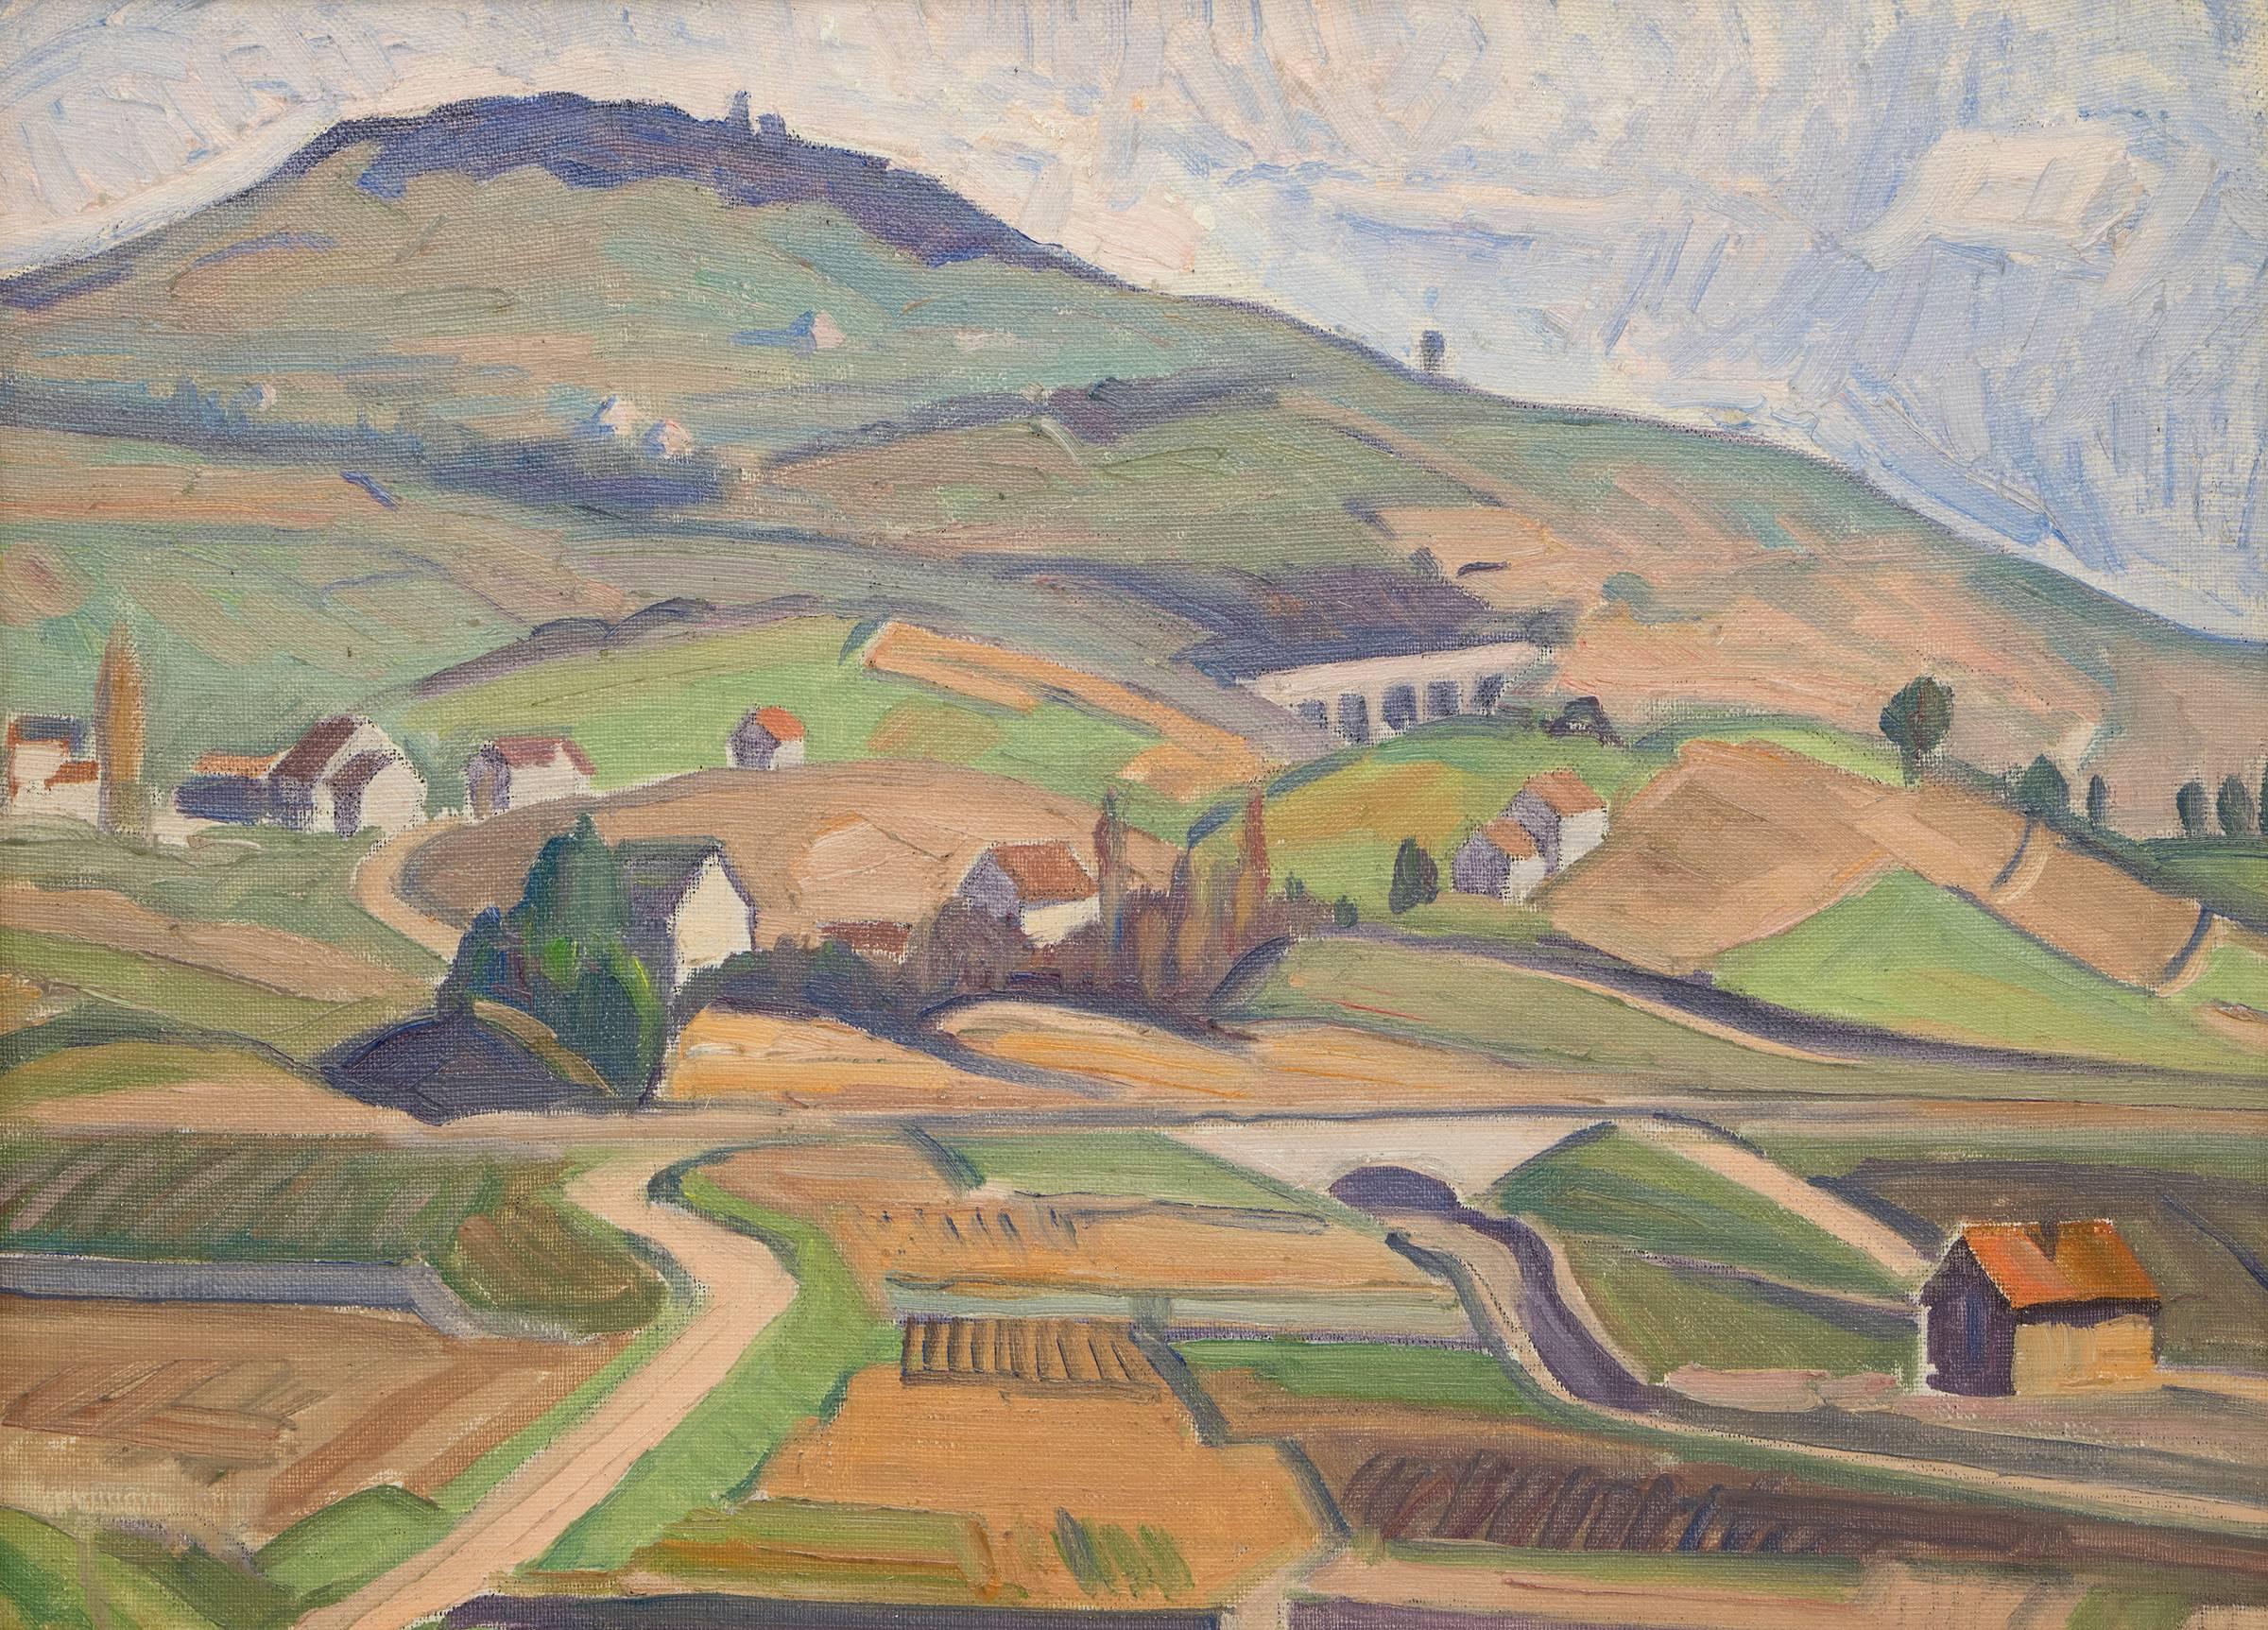 Untitled (Village, Switzerland/France Border) - Painting by Carl Lindin